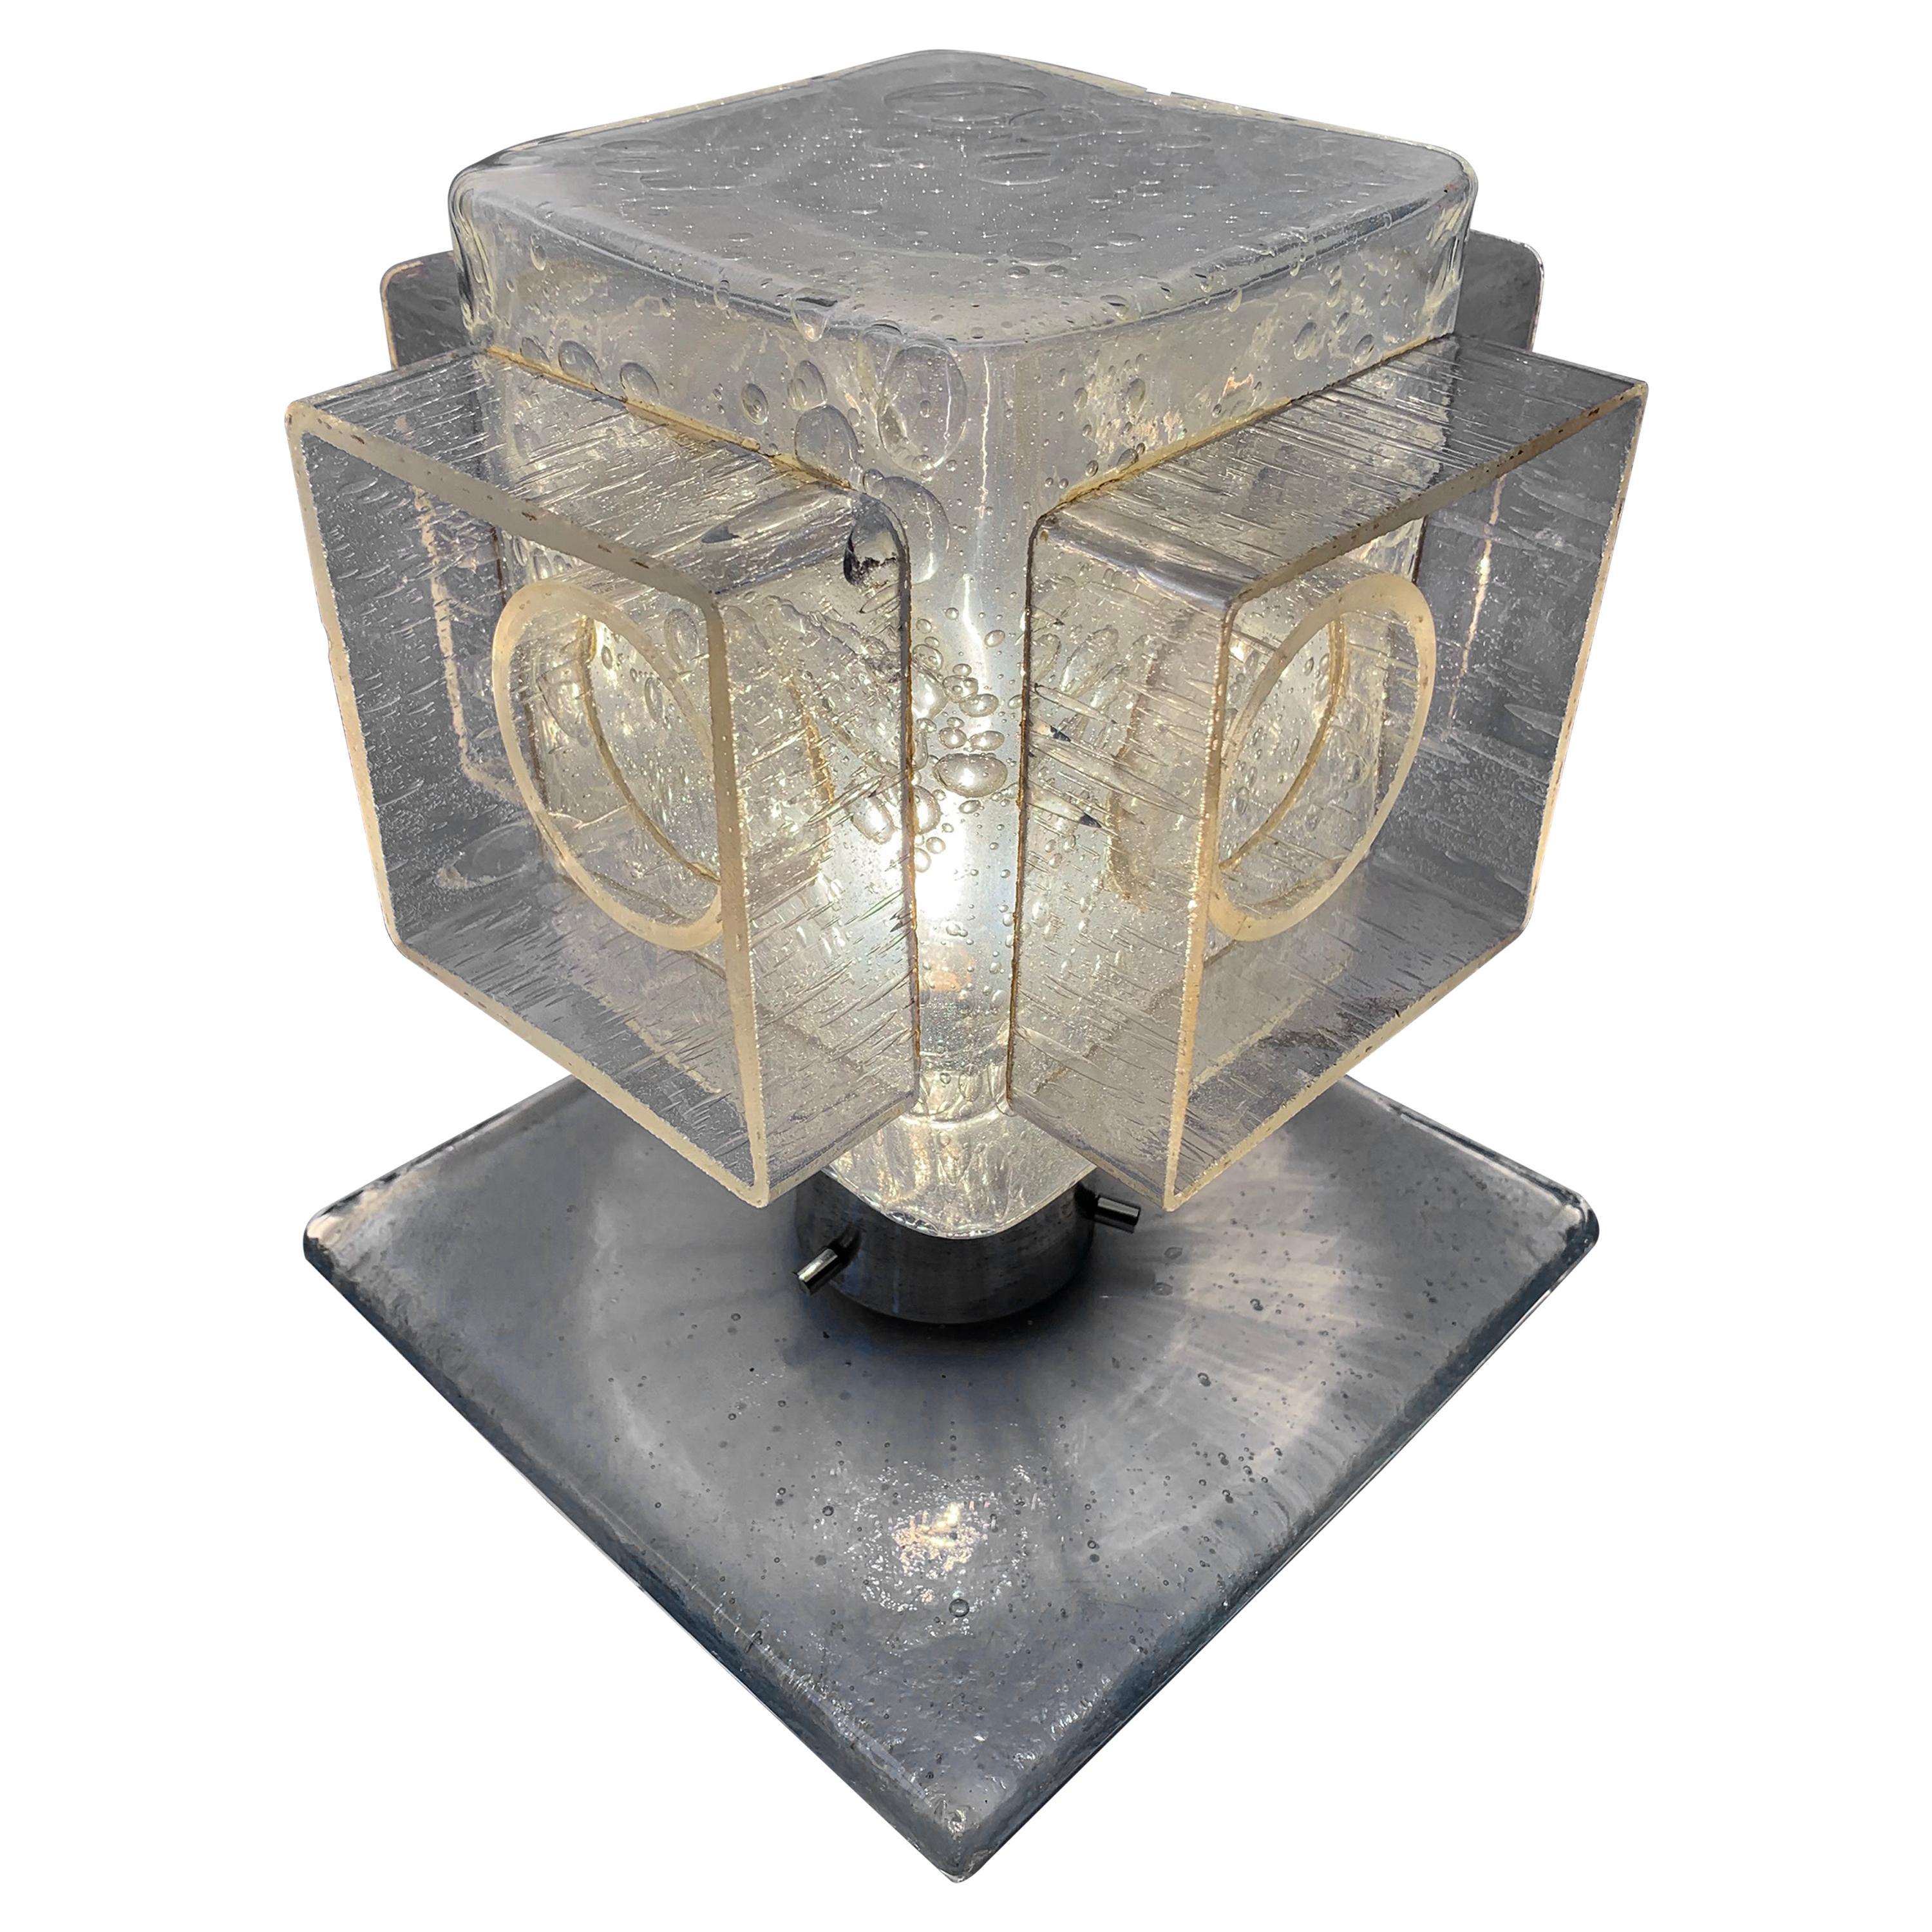 Rare and Early Production Table Light by Poliarte